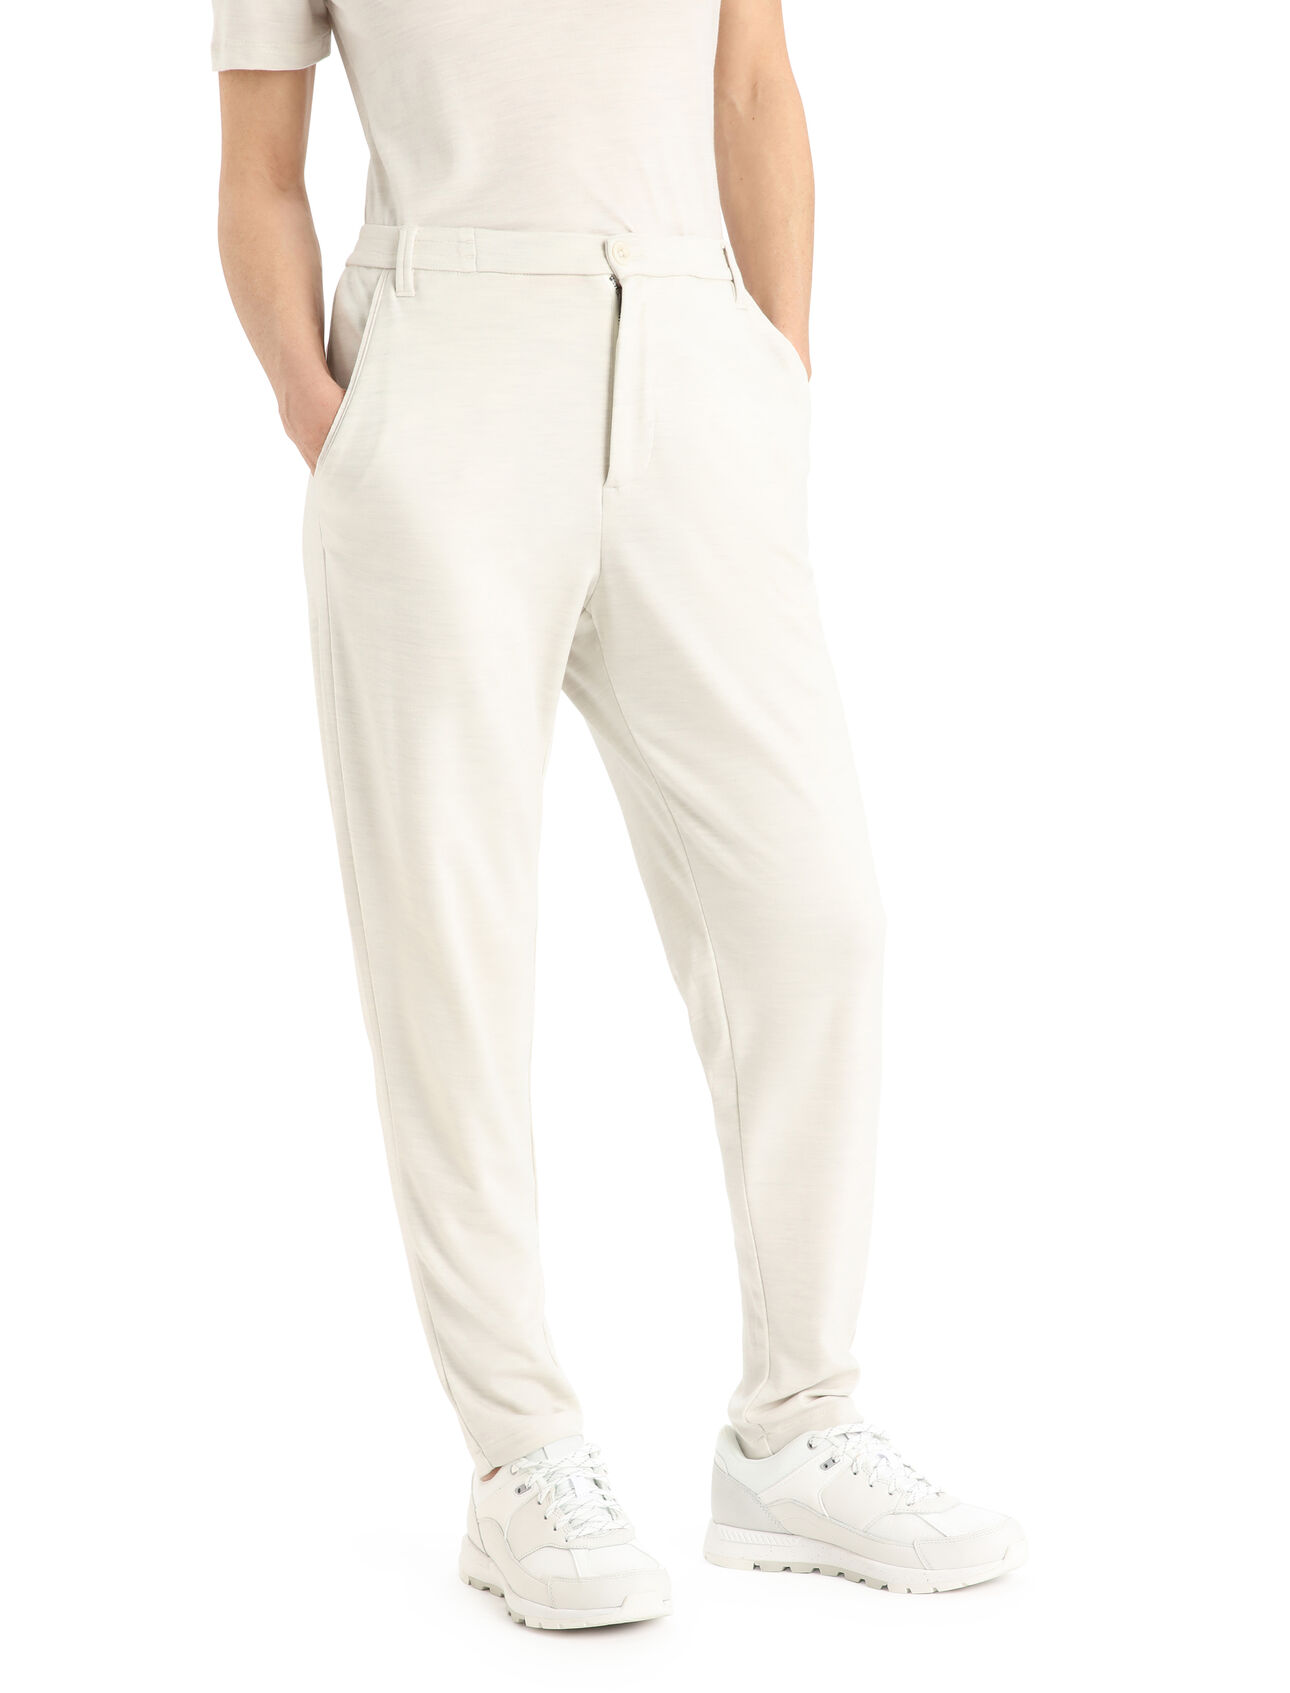 Womens MerinoFine™ Interlock Pants Classic chino-style pants made with luxuriously soft, 15.5 micron 100% pure merino wool fibers, the MerinoFine™ Interlock Pants are naturally comfortable, breathable and odor-resistant. 